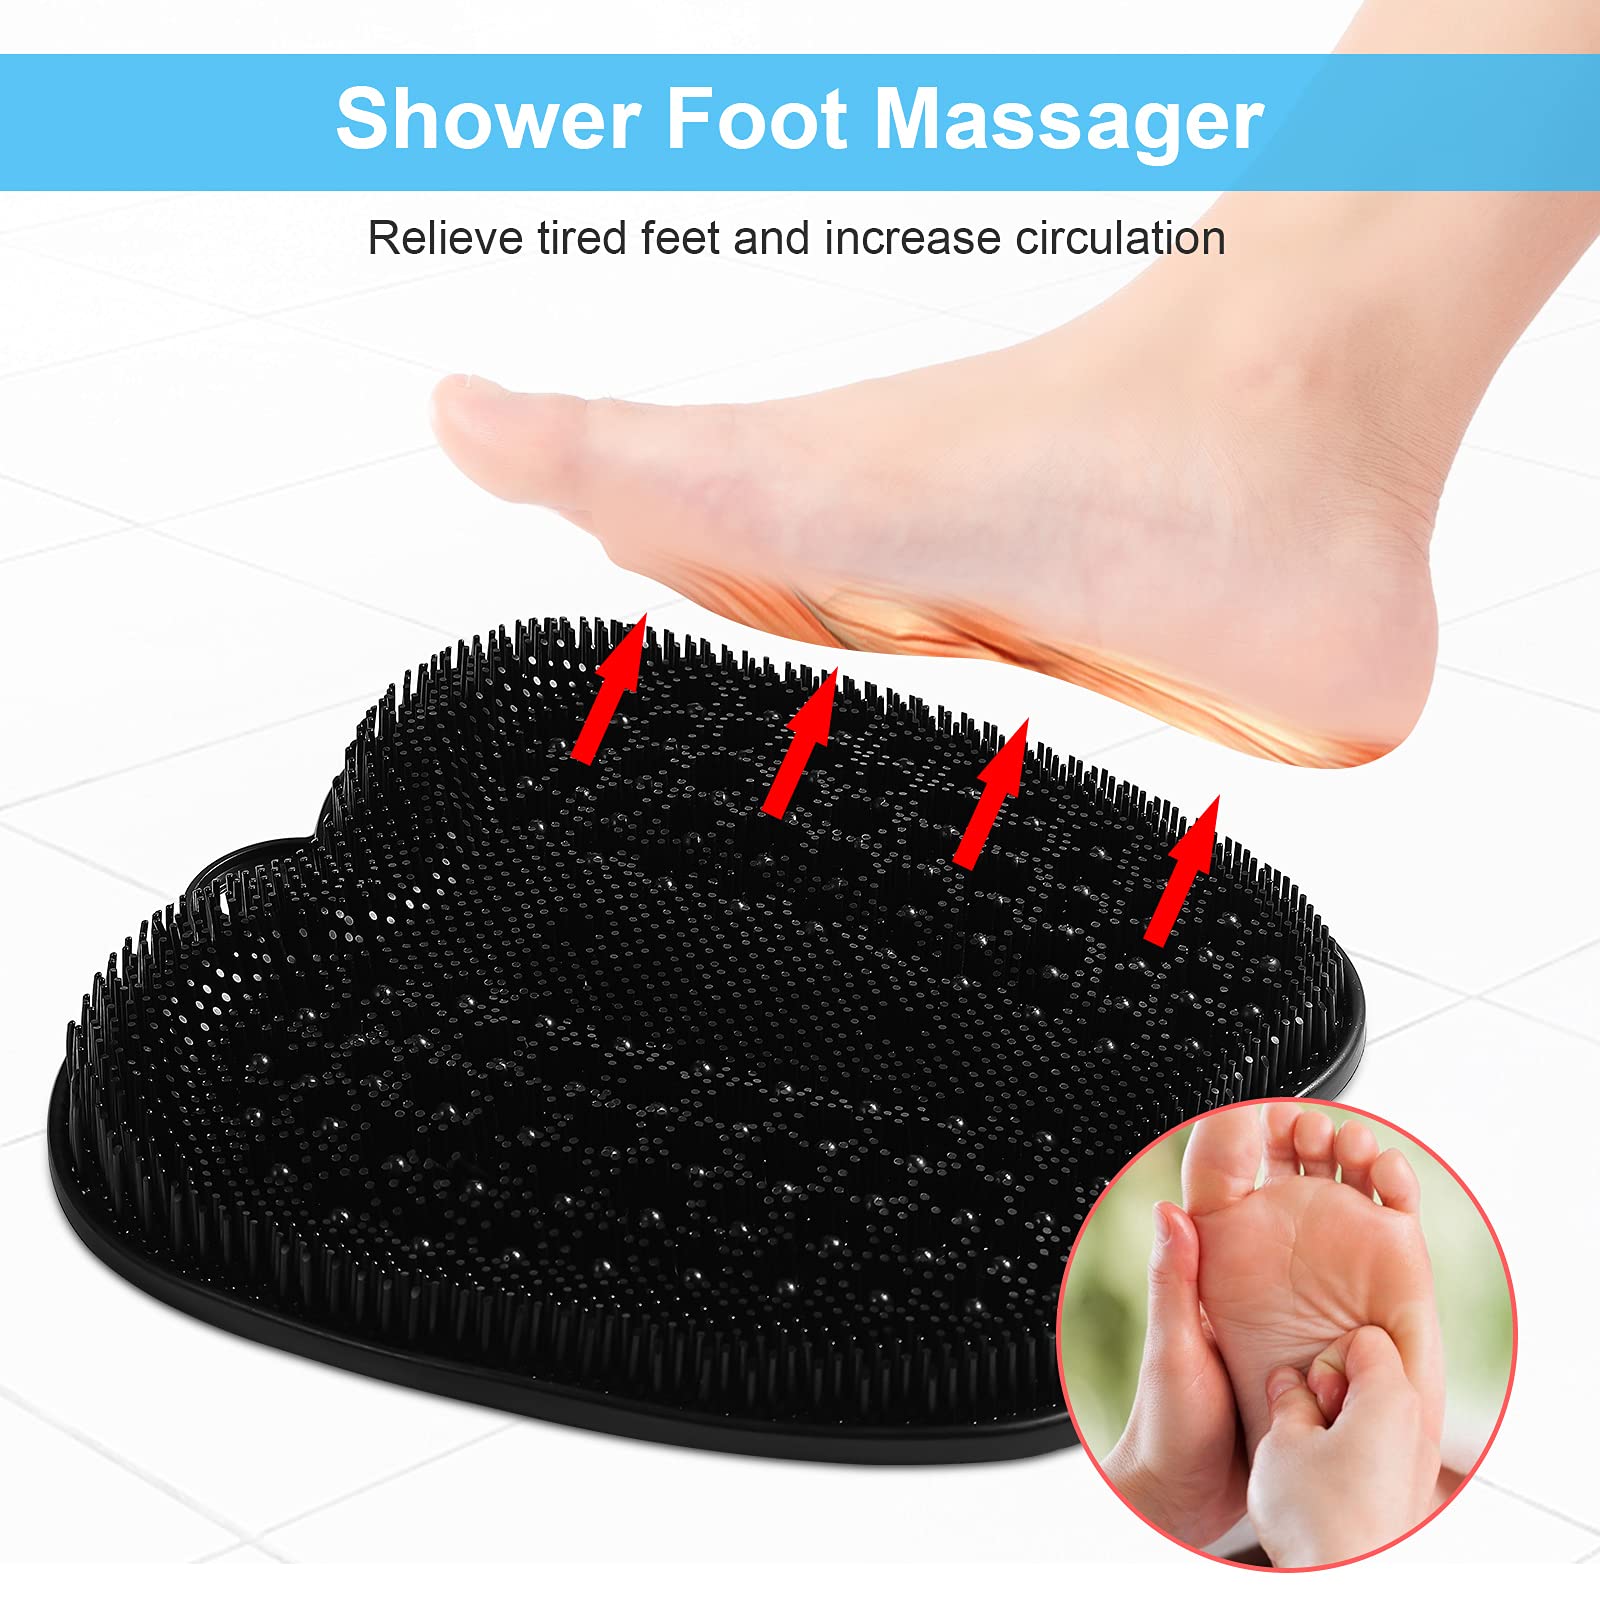 HONYIN XL Size Large Shower Foot Scrubber Mat - Cleans，Exfoliation，Massages Your Feet Without Bending, Foot Circulation & Relieve Tired Feet, Foot Scrubber for Use in Shower with Non-Slip Suction Cups